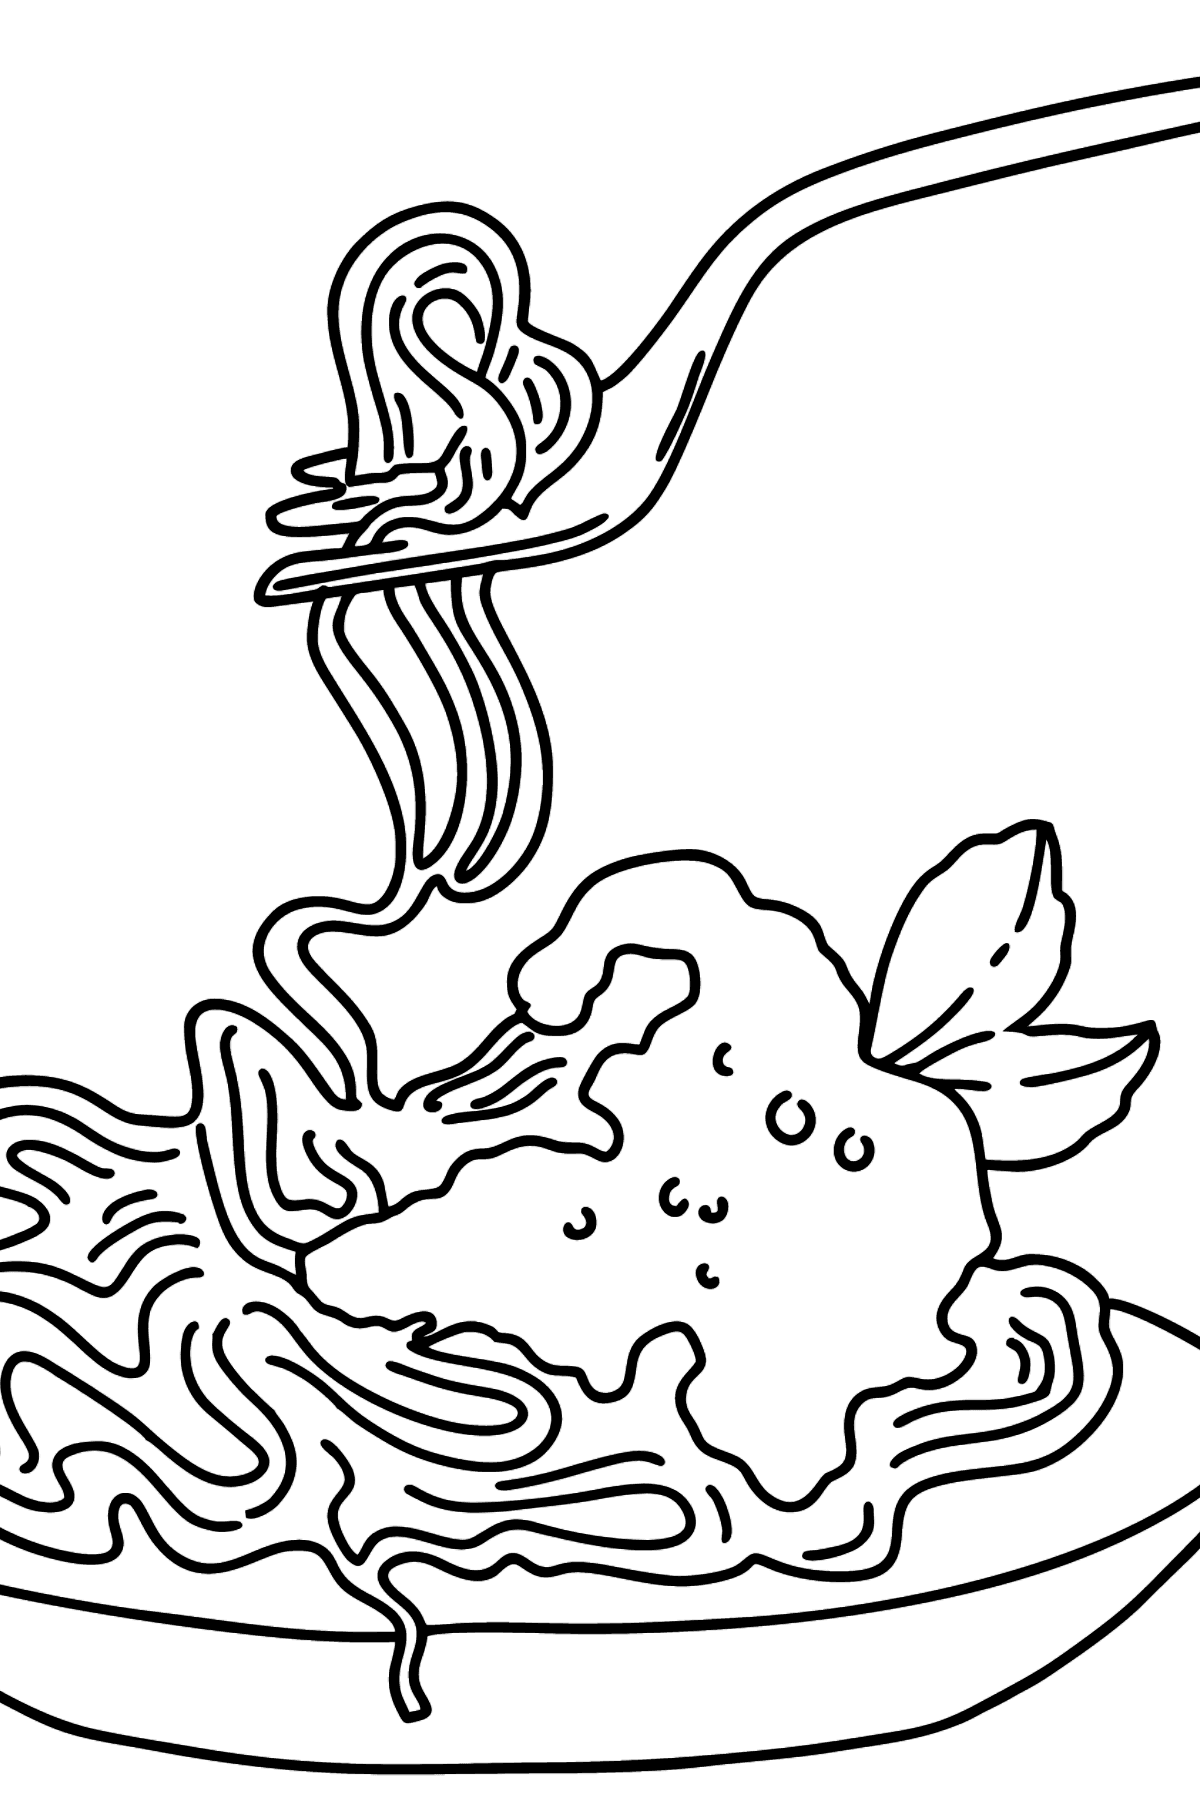 Spaghetti with Tomato Sauce coloring page - Coloring Pages for Kids